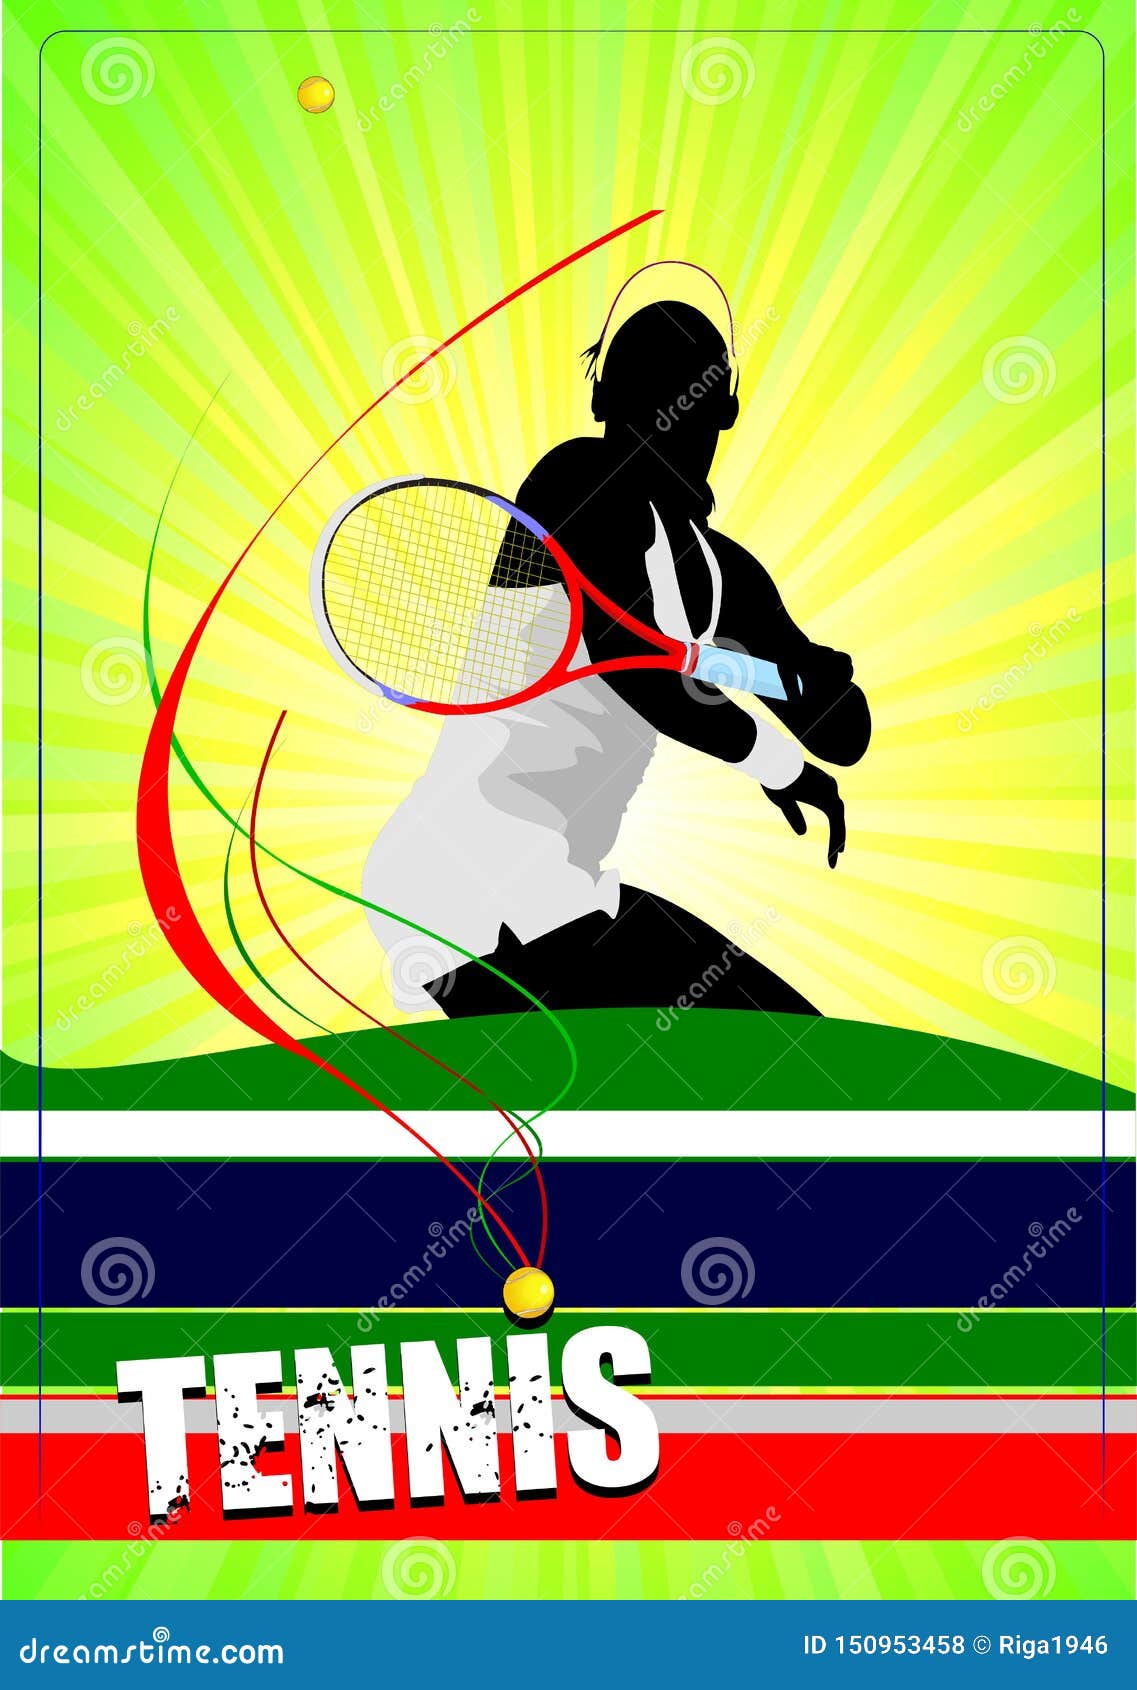 Woman Tennis Player Poster Stock Vector Illustration Of Serve Tournament